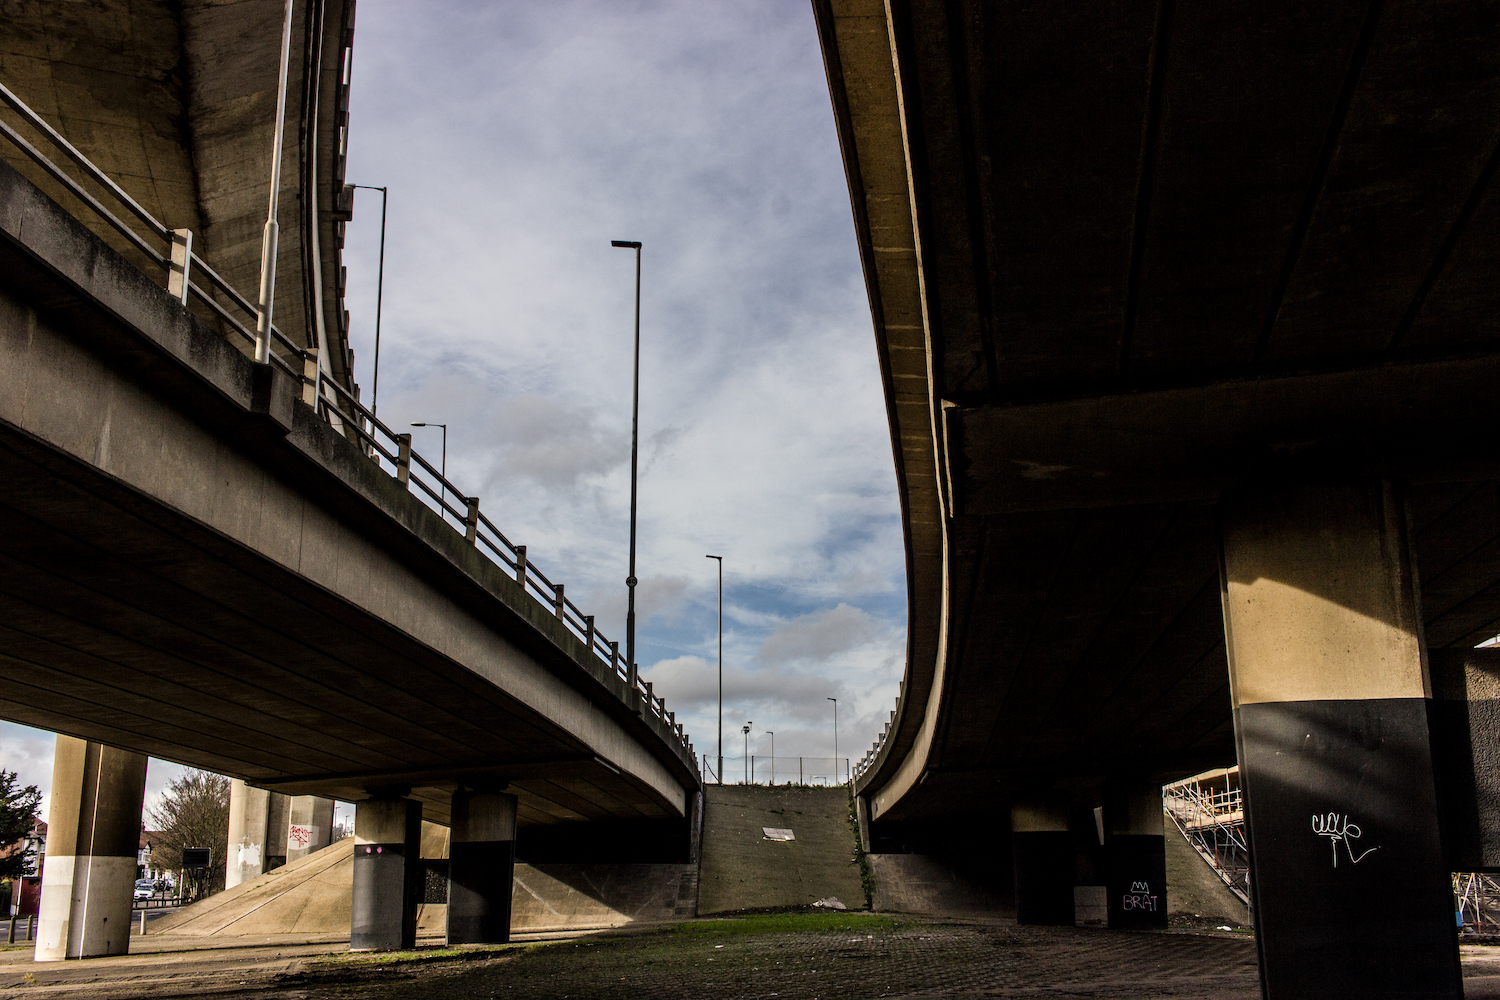 Professional Photography Concrete Roundabout In South Woodford North East London With Three Overpasses Pillars And Ramp